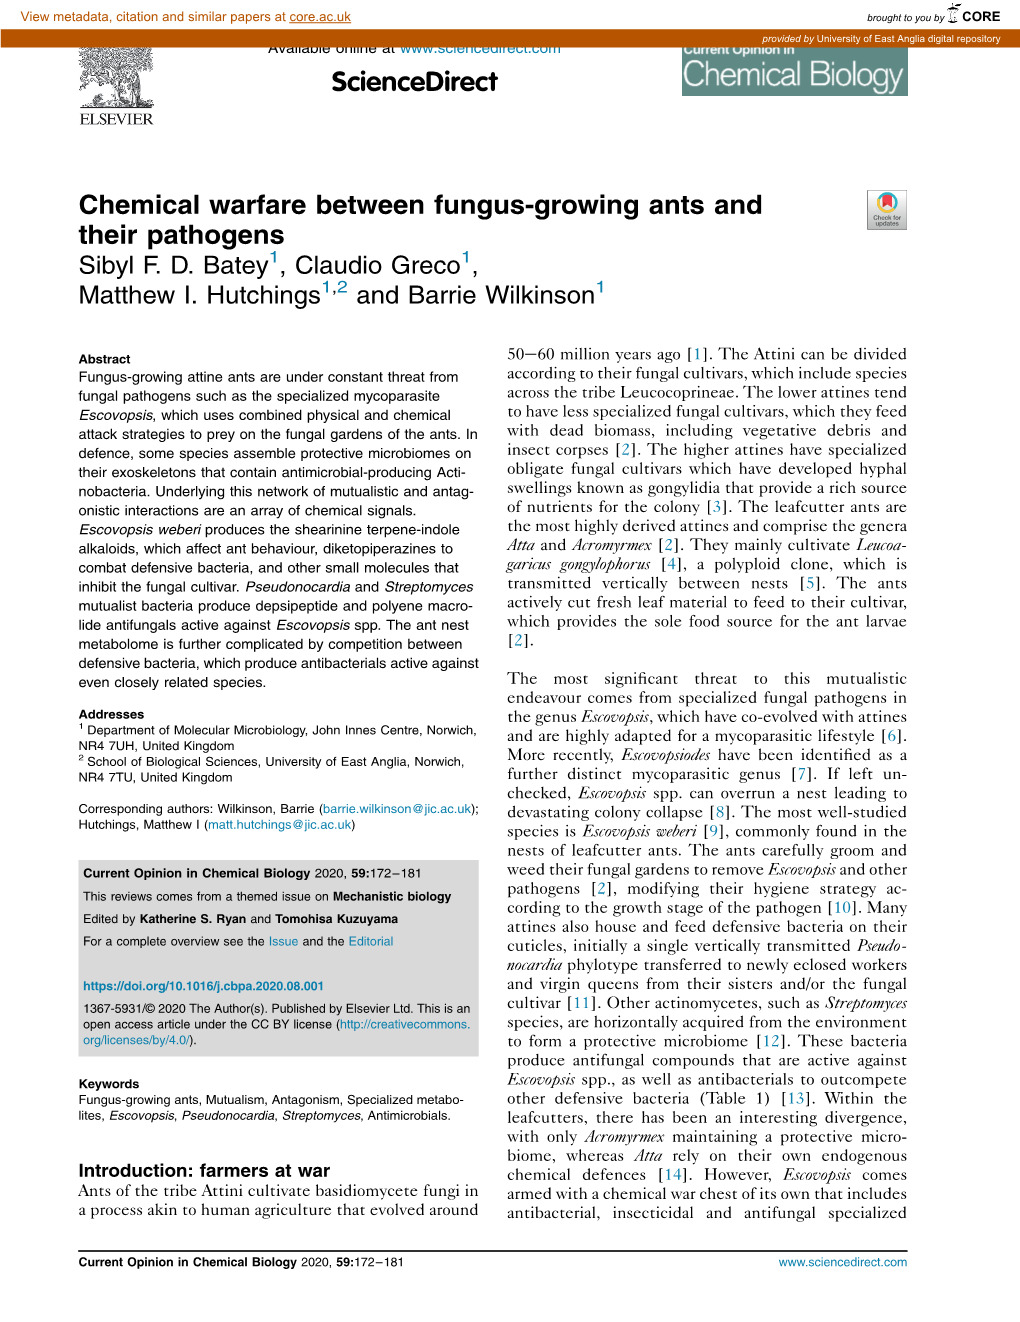 Chemical Warfare Between Fungus-Growing Ants and Their Pathogens Sibyl F